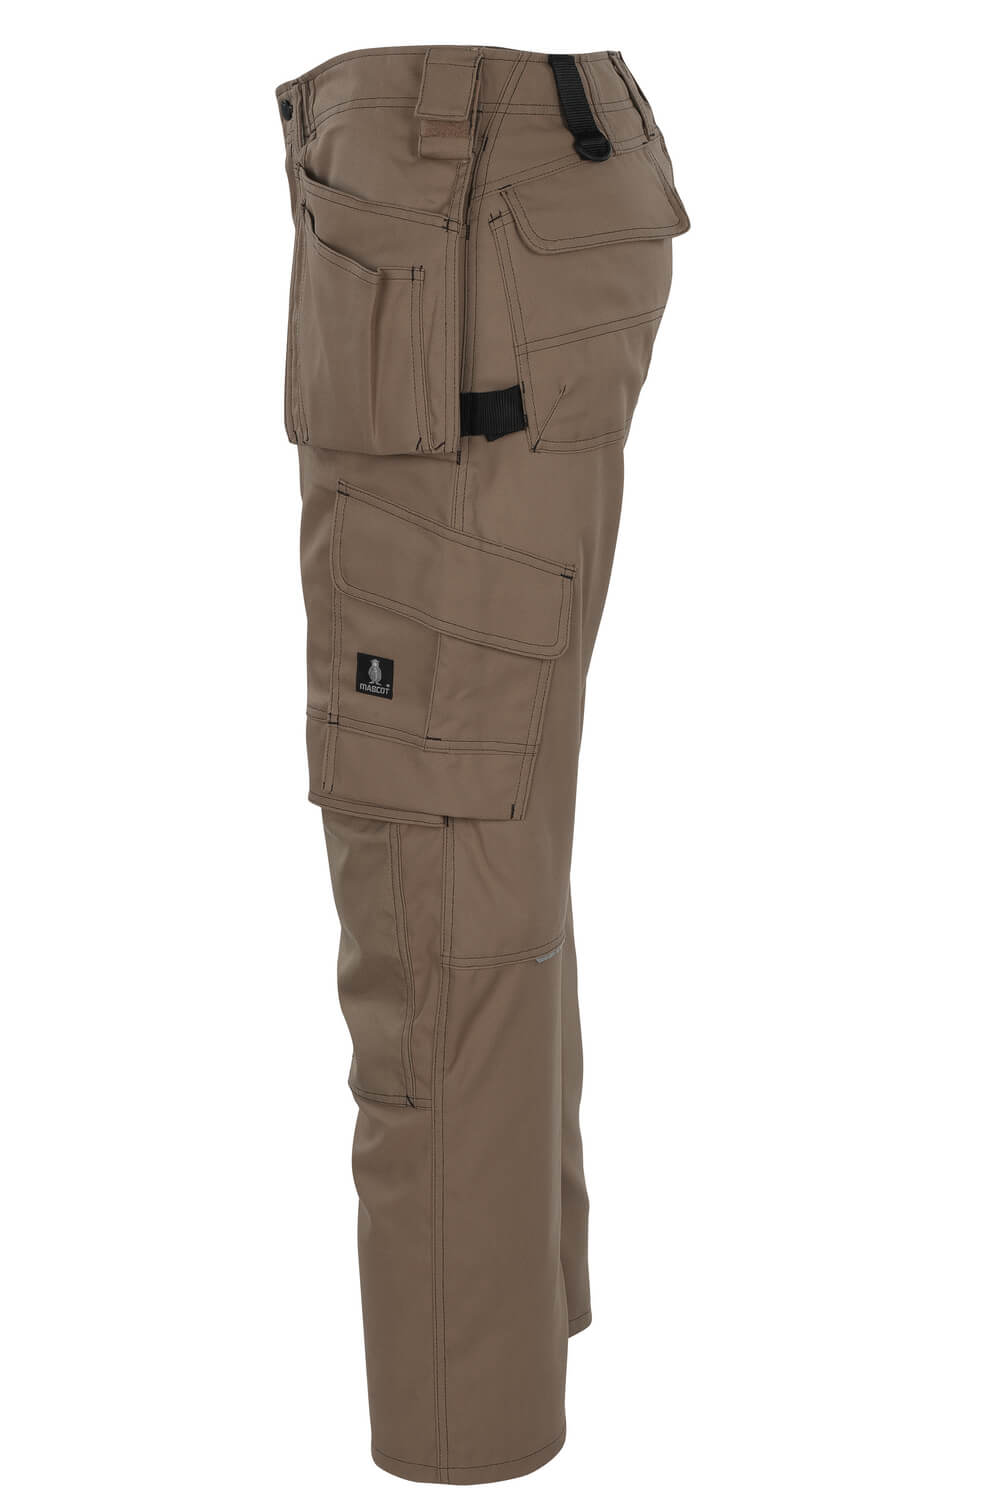 MASCOT HARDWEAR Trousers with kneepad pockets and holster pockets  08131